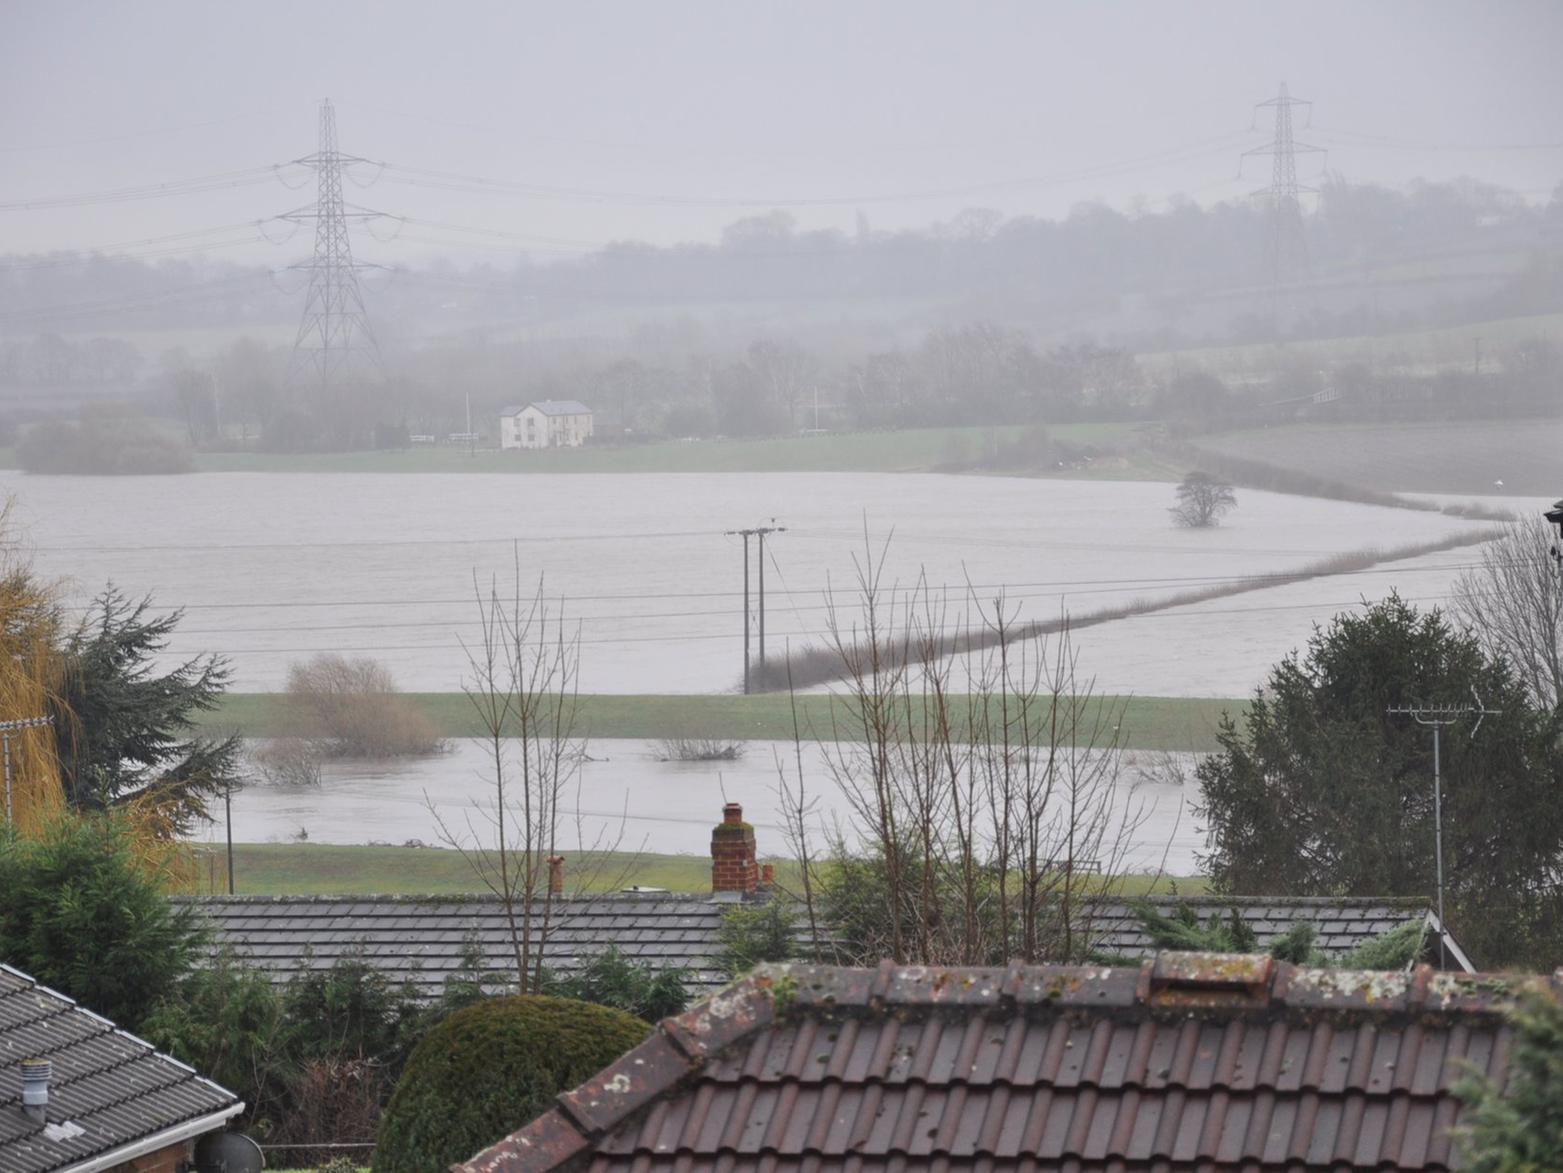 John said: "River Calder and flooded fields between Stanley and Altofts. The white house in the mid-ground is the Lock-keepers House at Birkwood Lock on the canal. These fields were only just starting to dry out from the last bad rain."